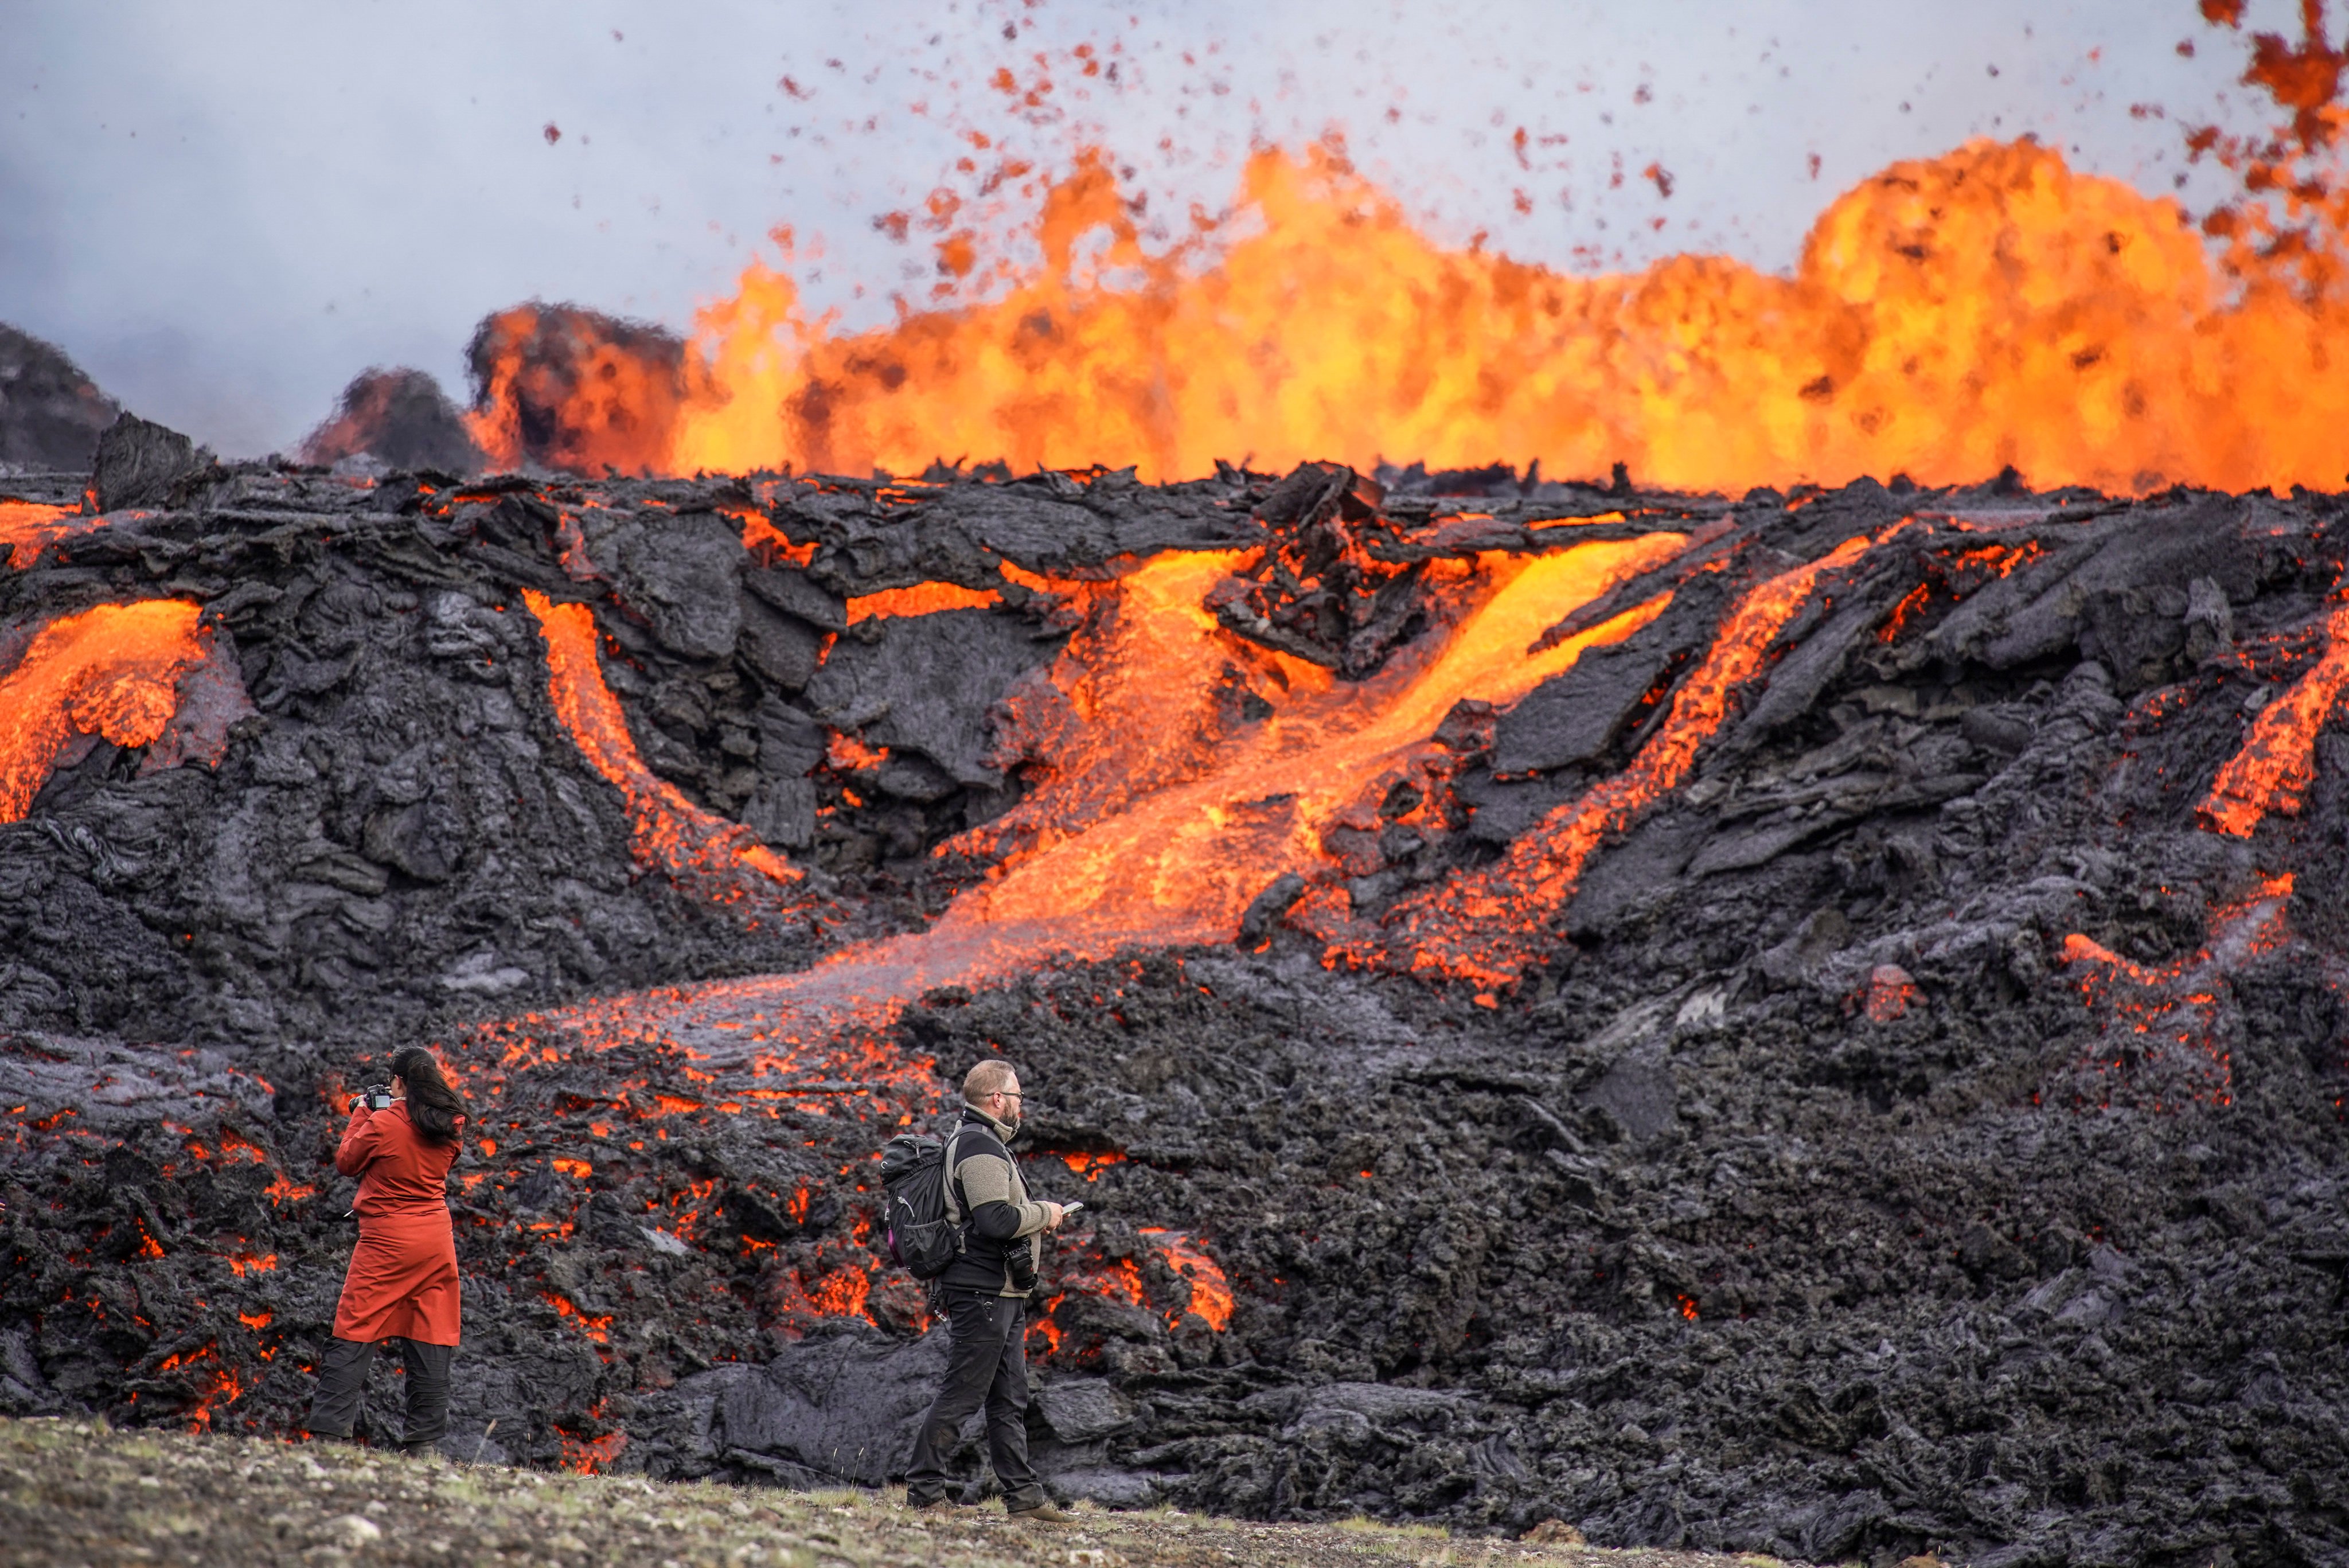 People look at the lava flowing on Fagradalsfjall volcano in Iceland on Wednesday. Photo: AP